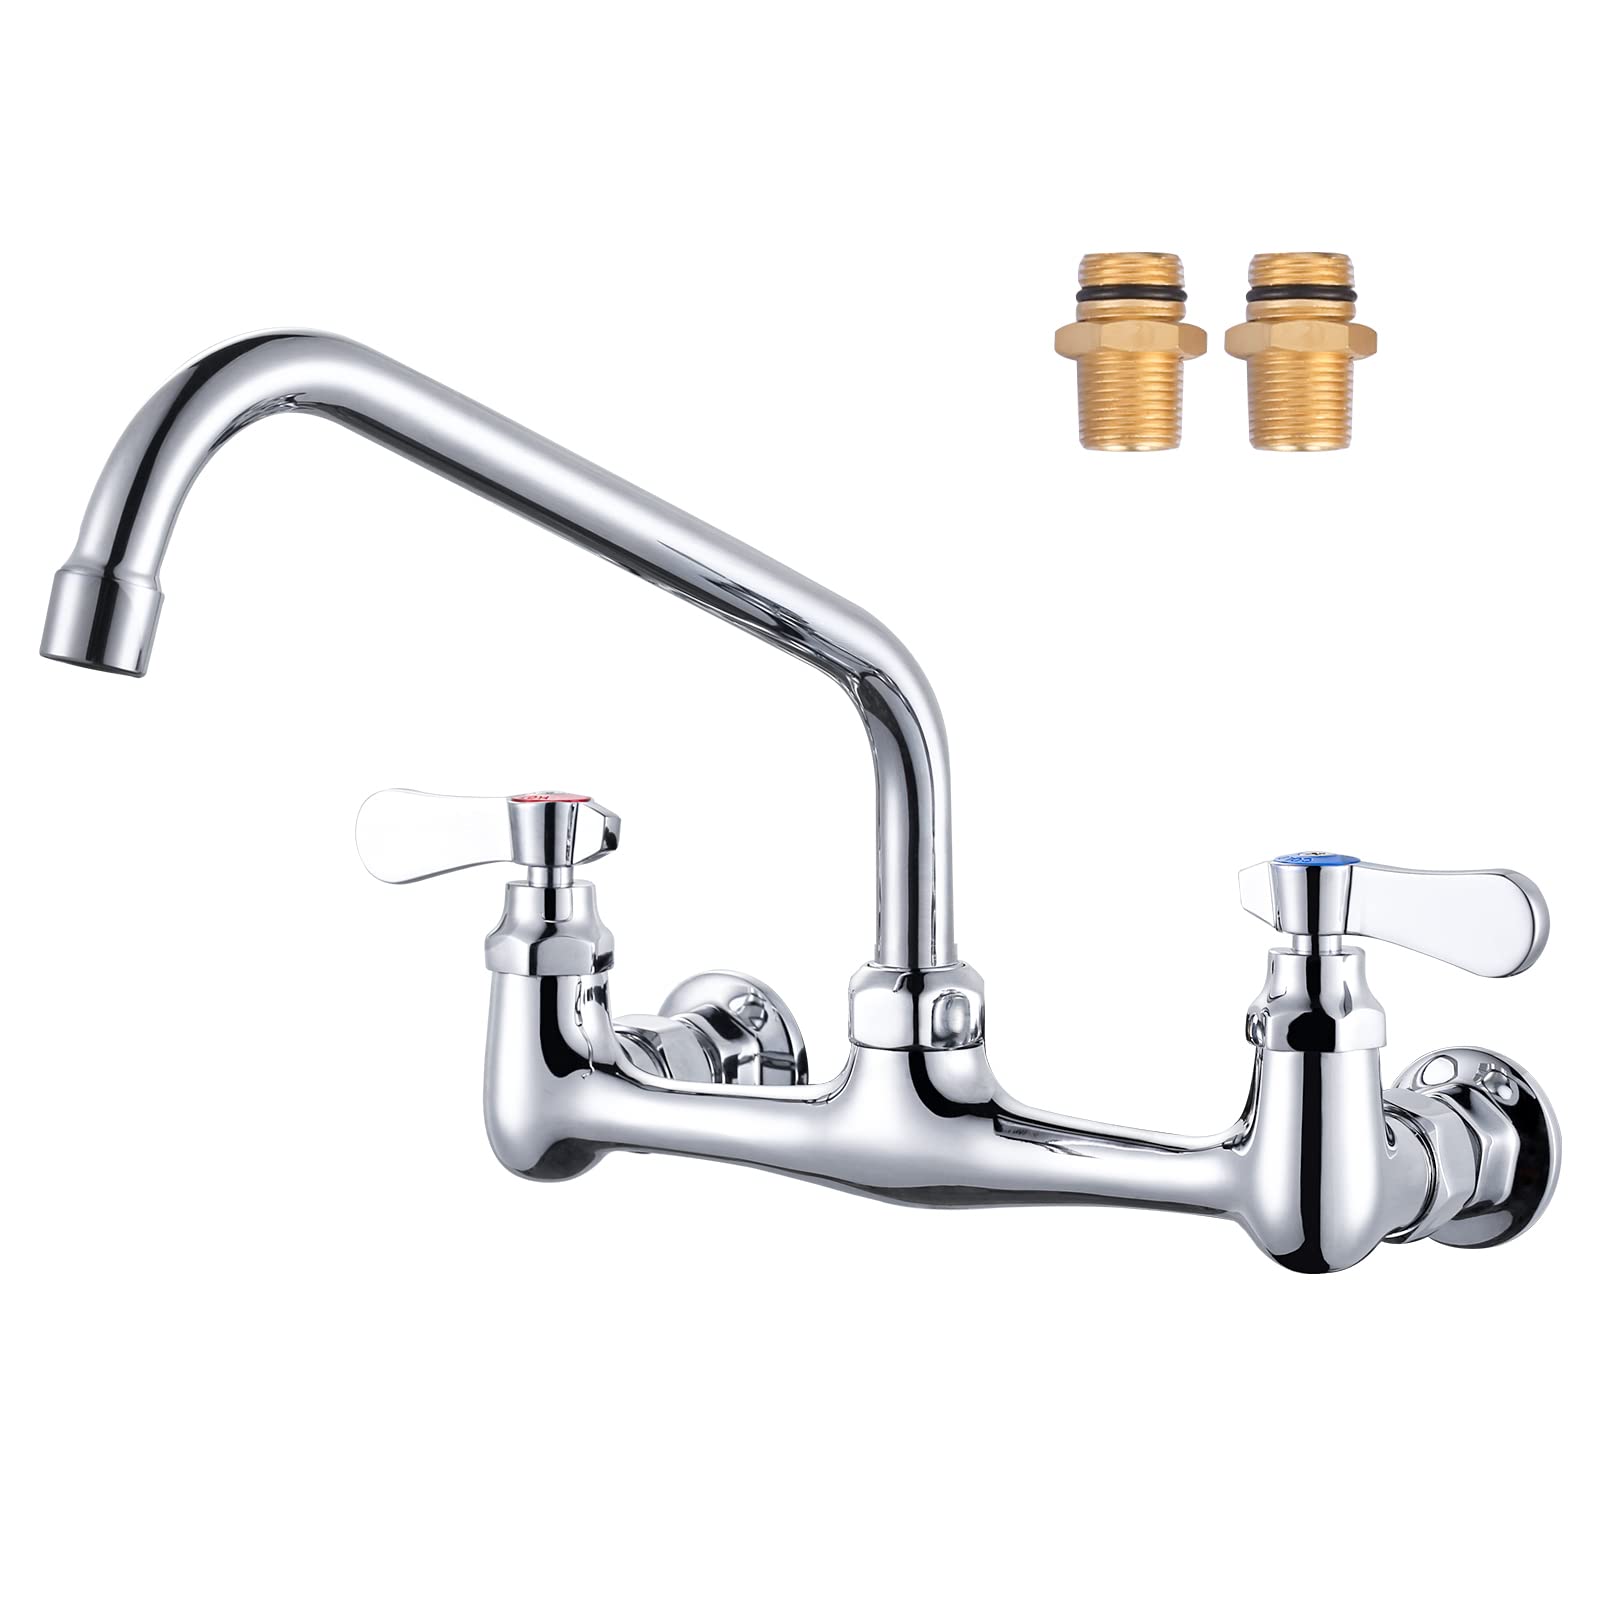 iVIGA Commercial Sink Faucet